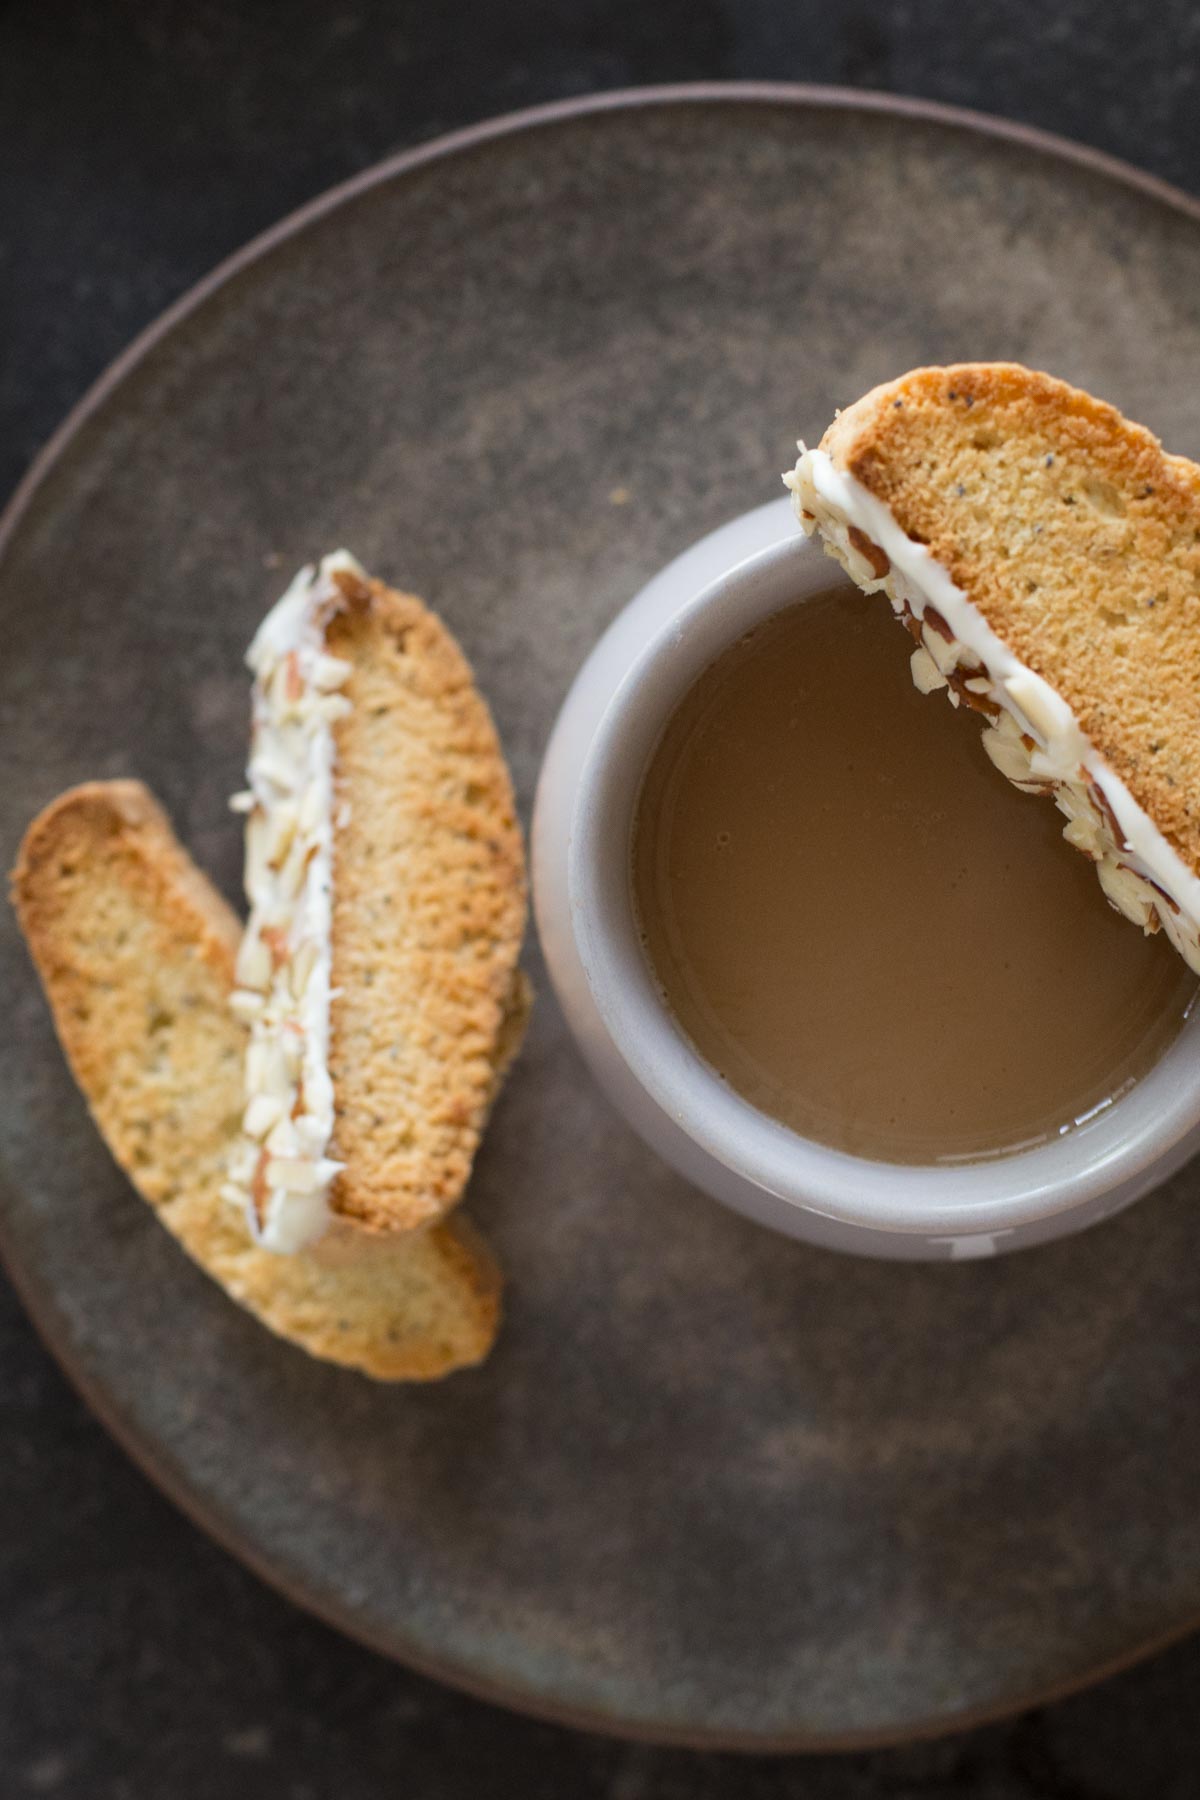 Two Almond Poppy Seed Biscotti slices on a plate, along with a cup of coffee with an Almond Poppy Seed Biscotti slice balancing on the rim of the cup.  